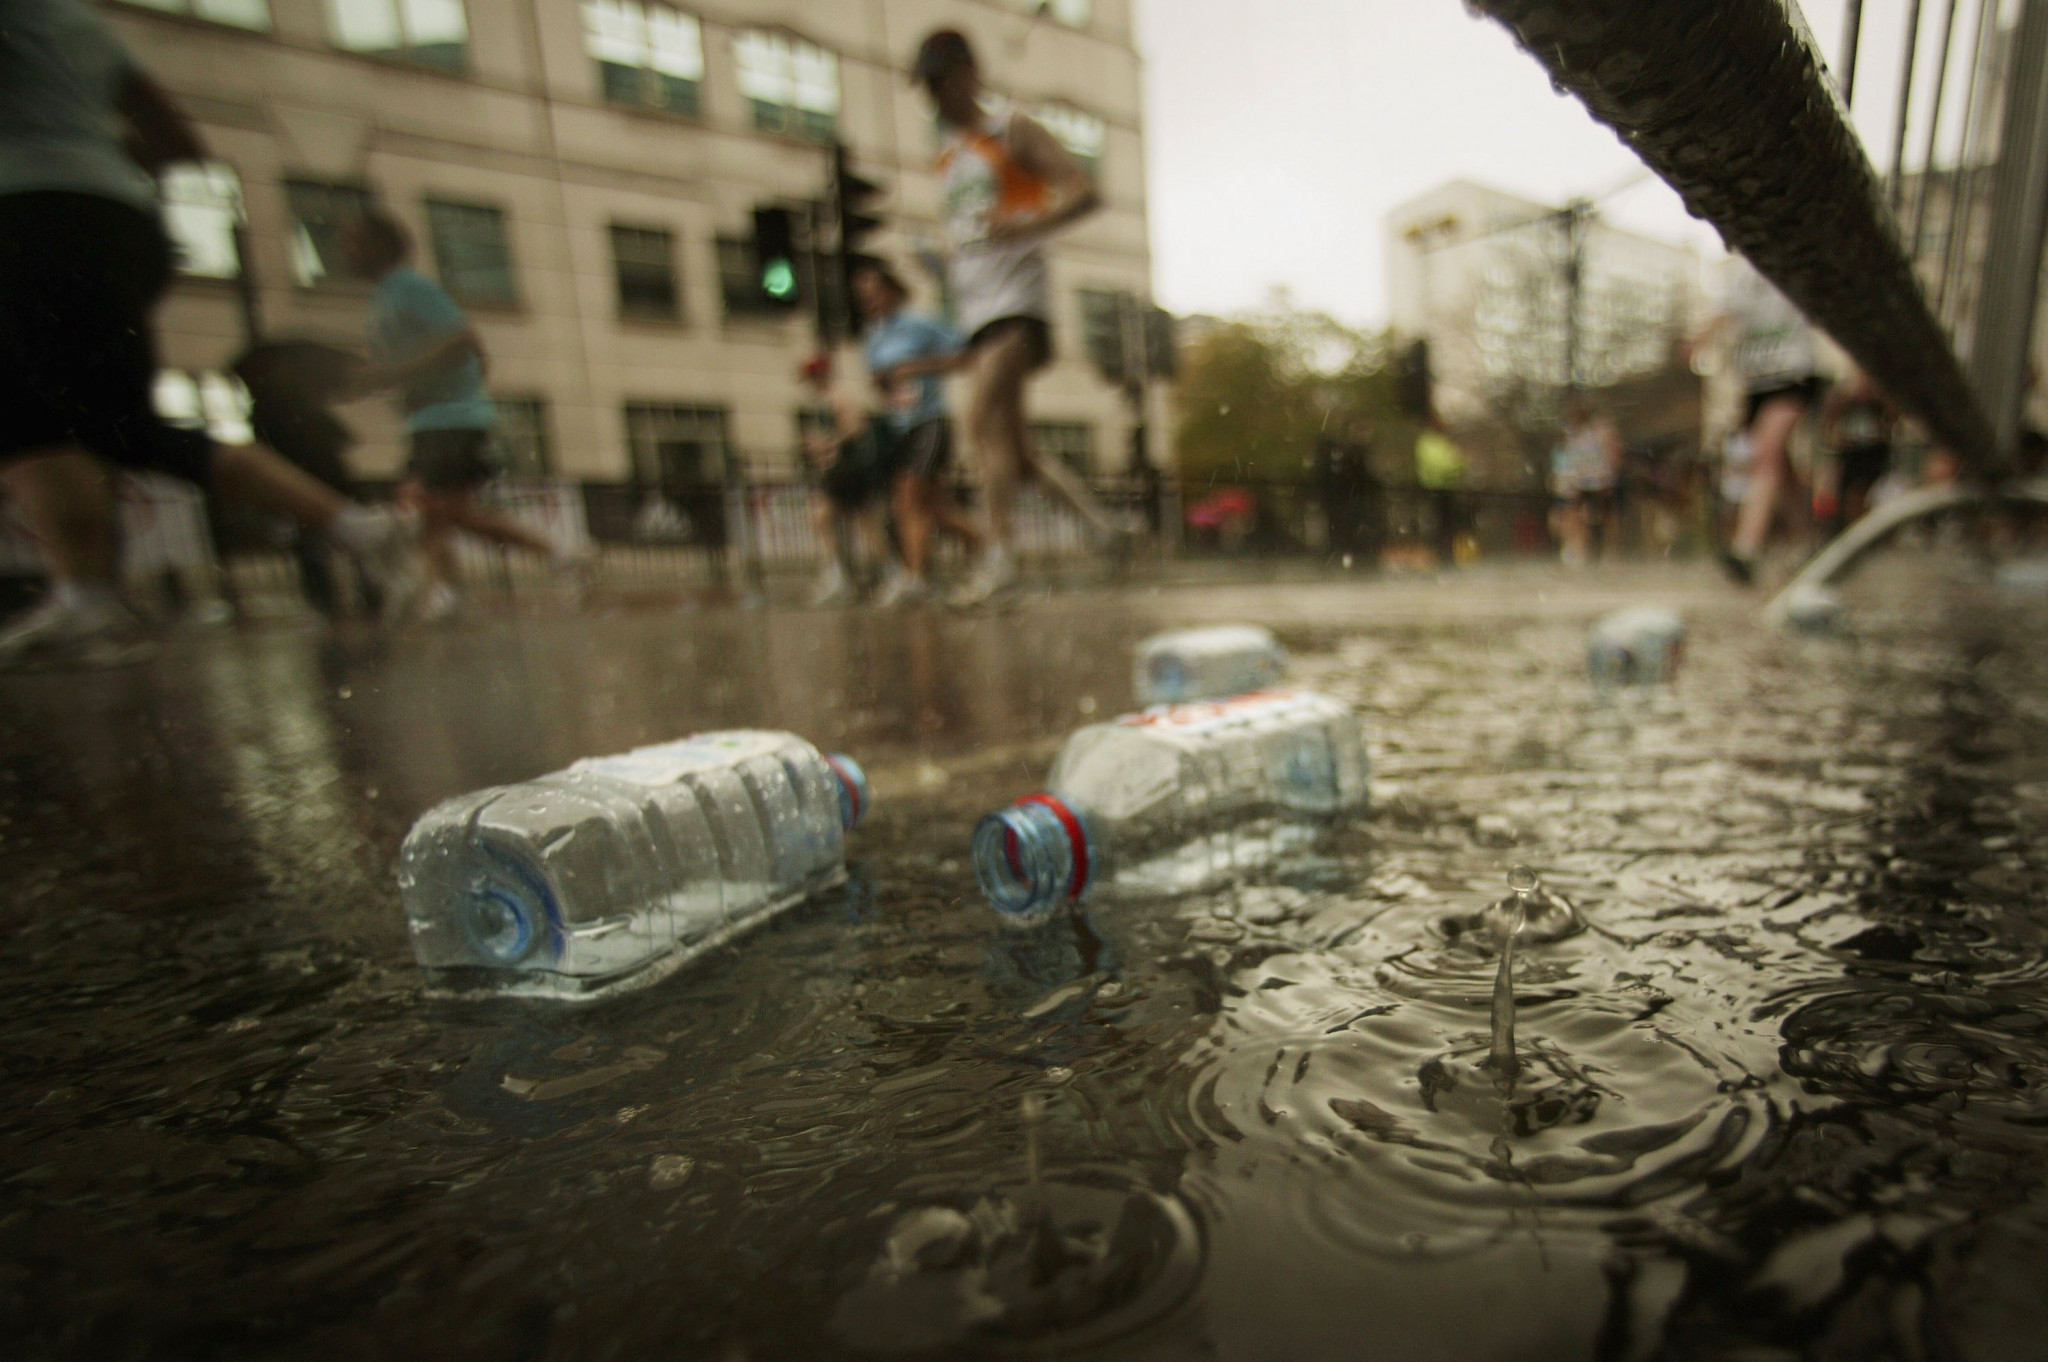 The belts are set to stop London Marathon participants from throwing their bottles into the streets ©Getty Images